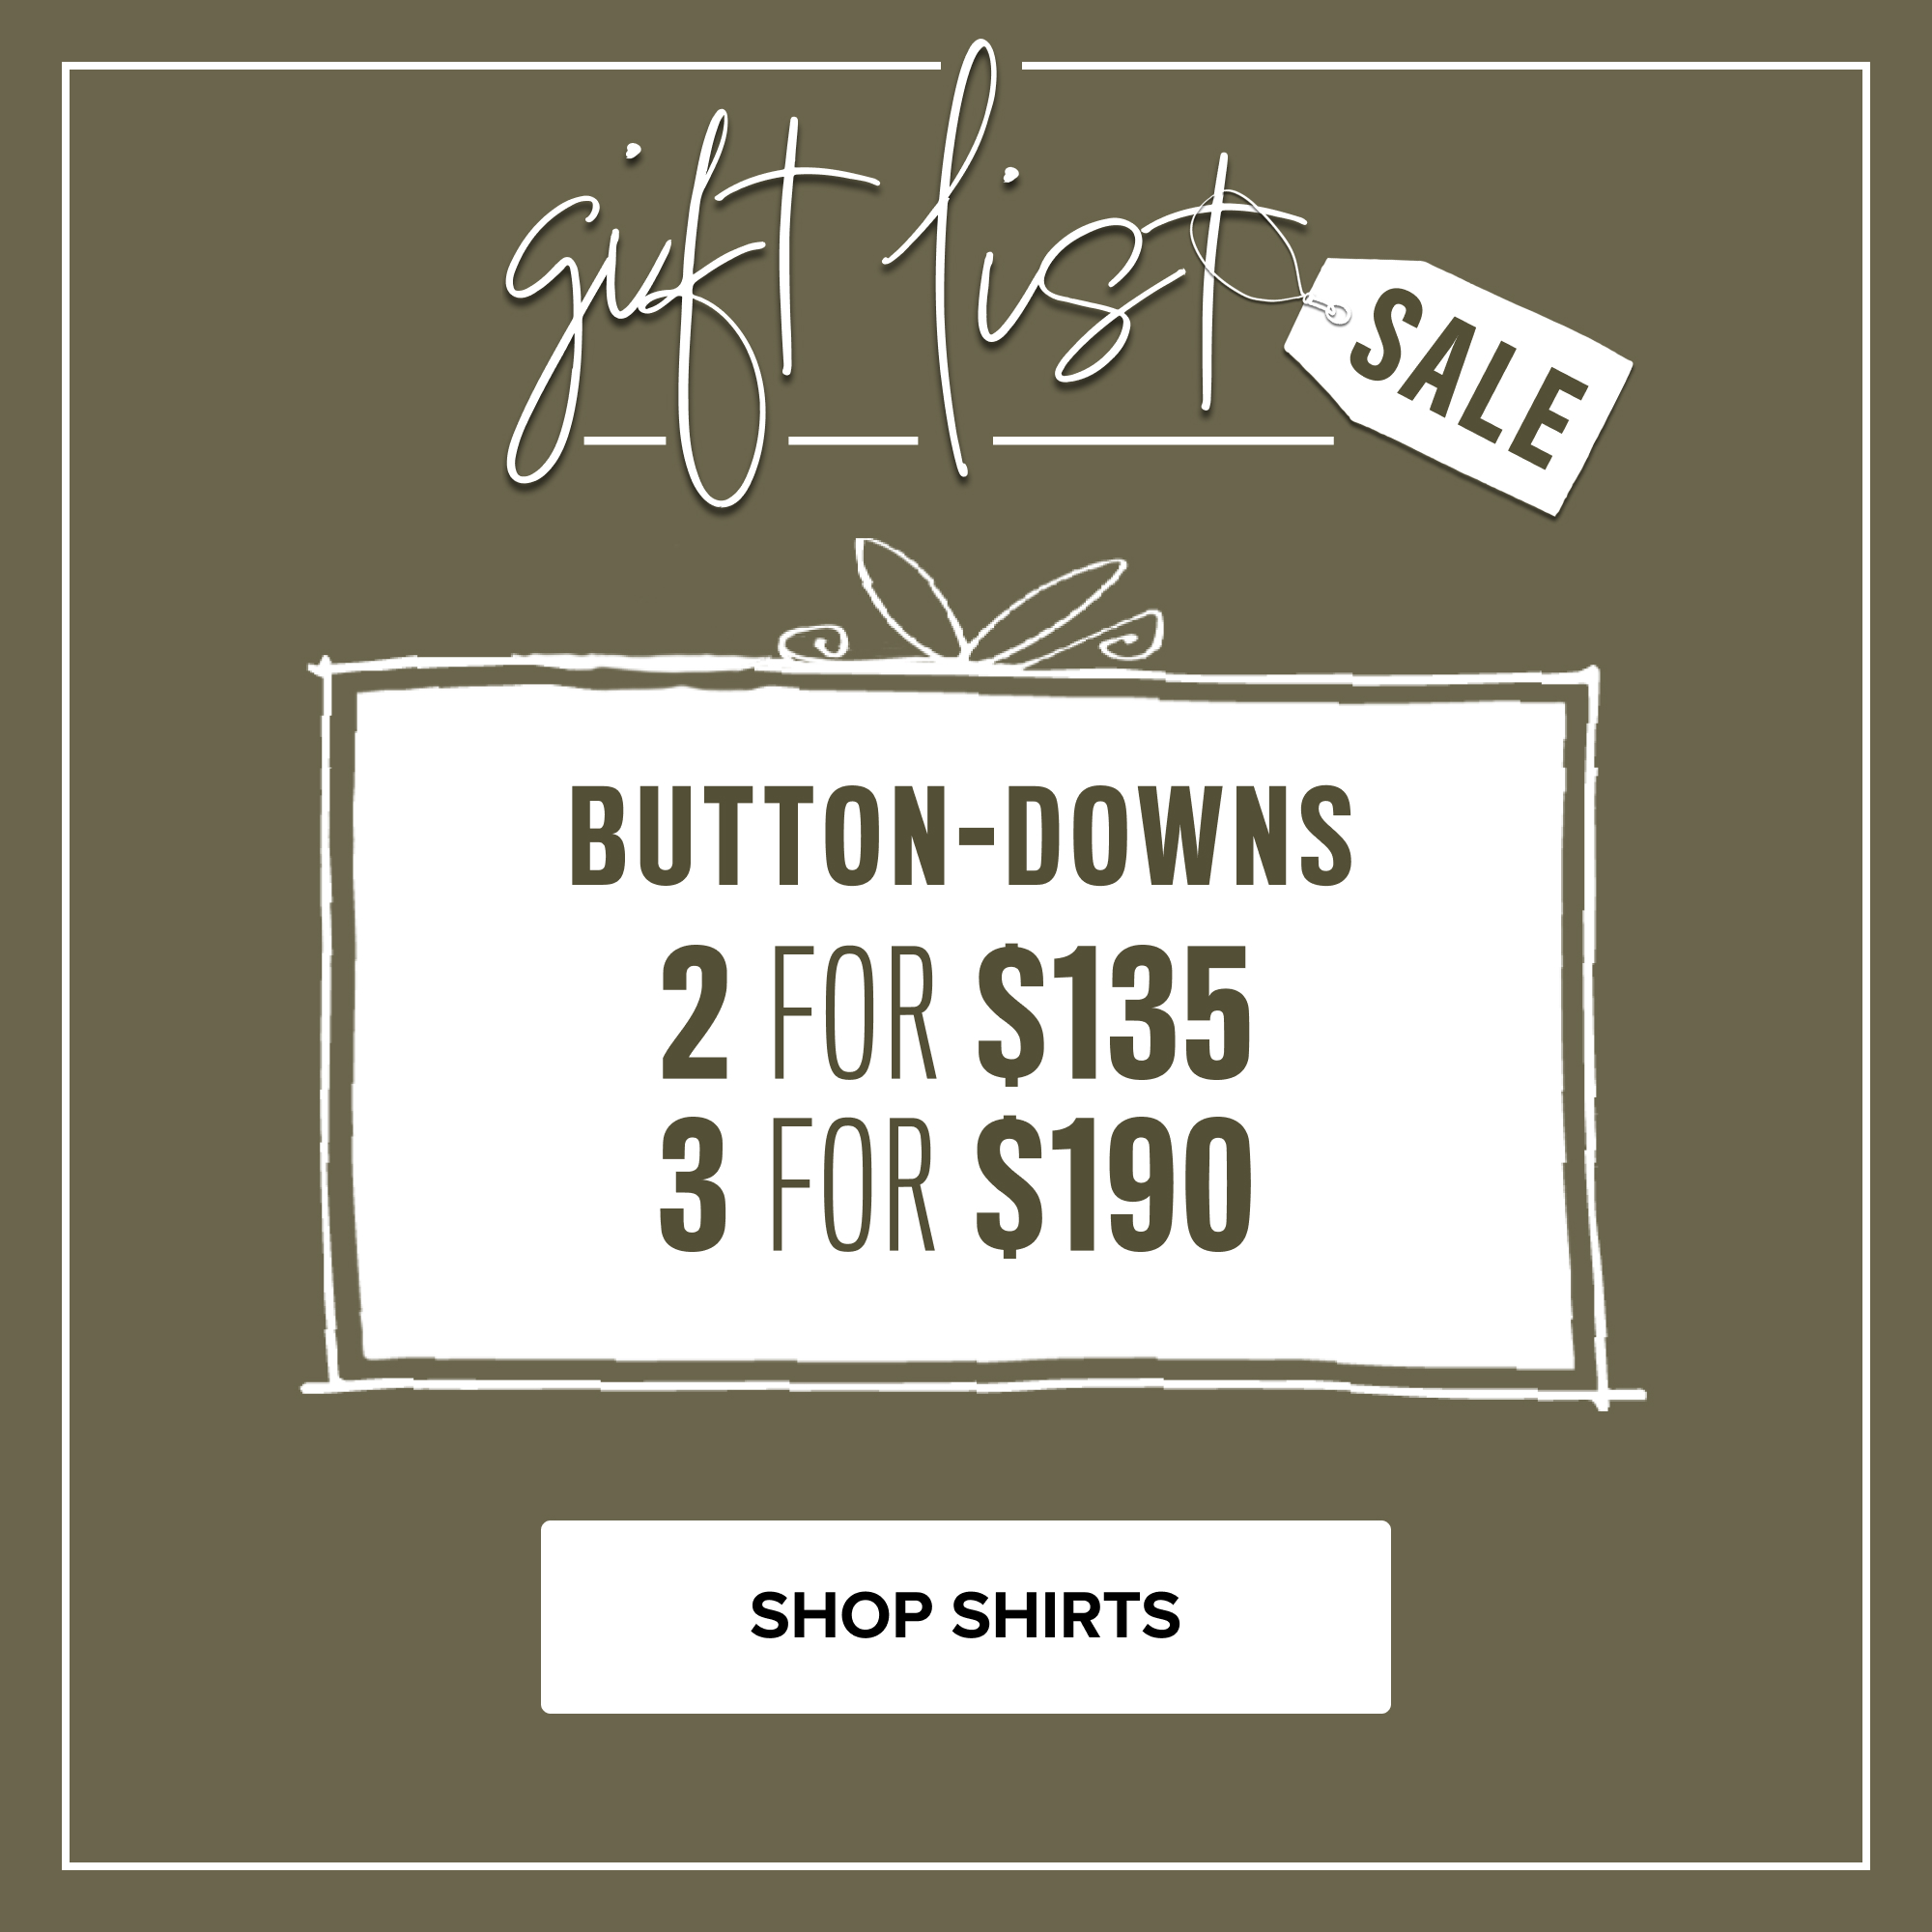 Gift List Sale. Button Downs: 2 for $135. 3 for $190.